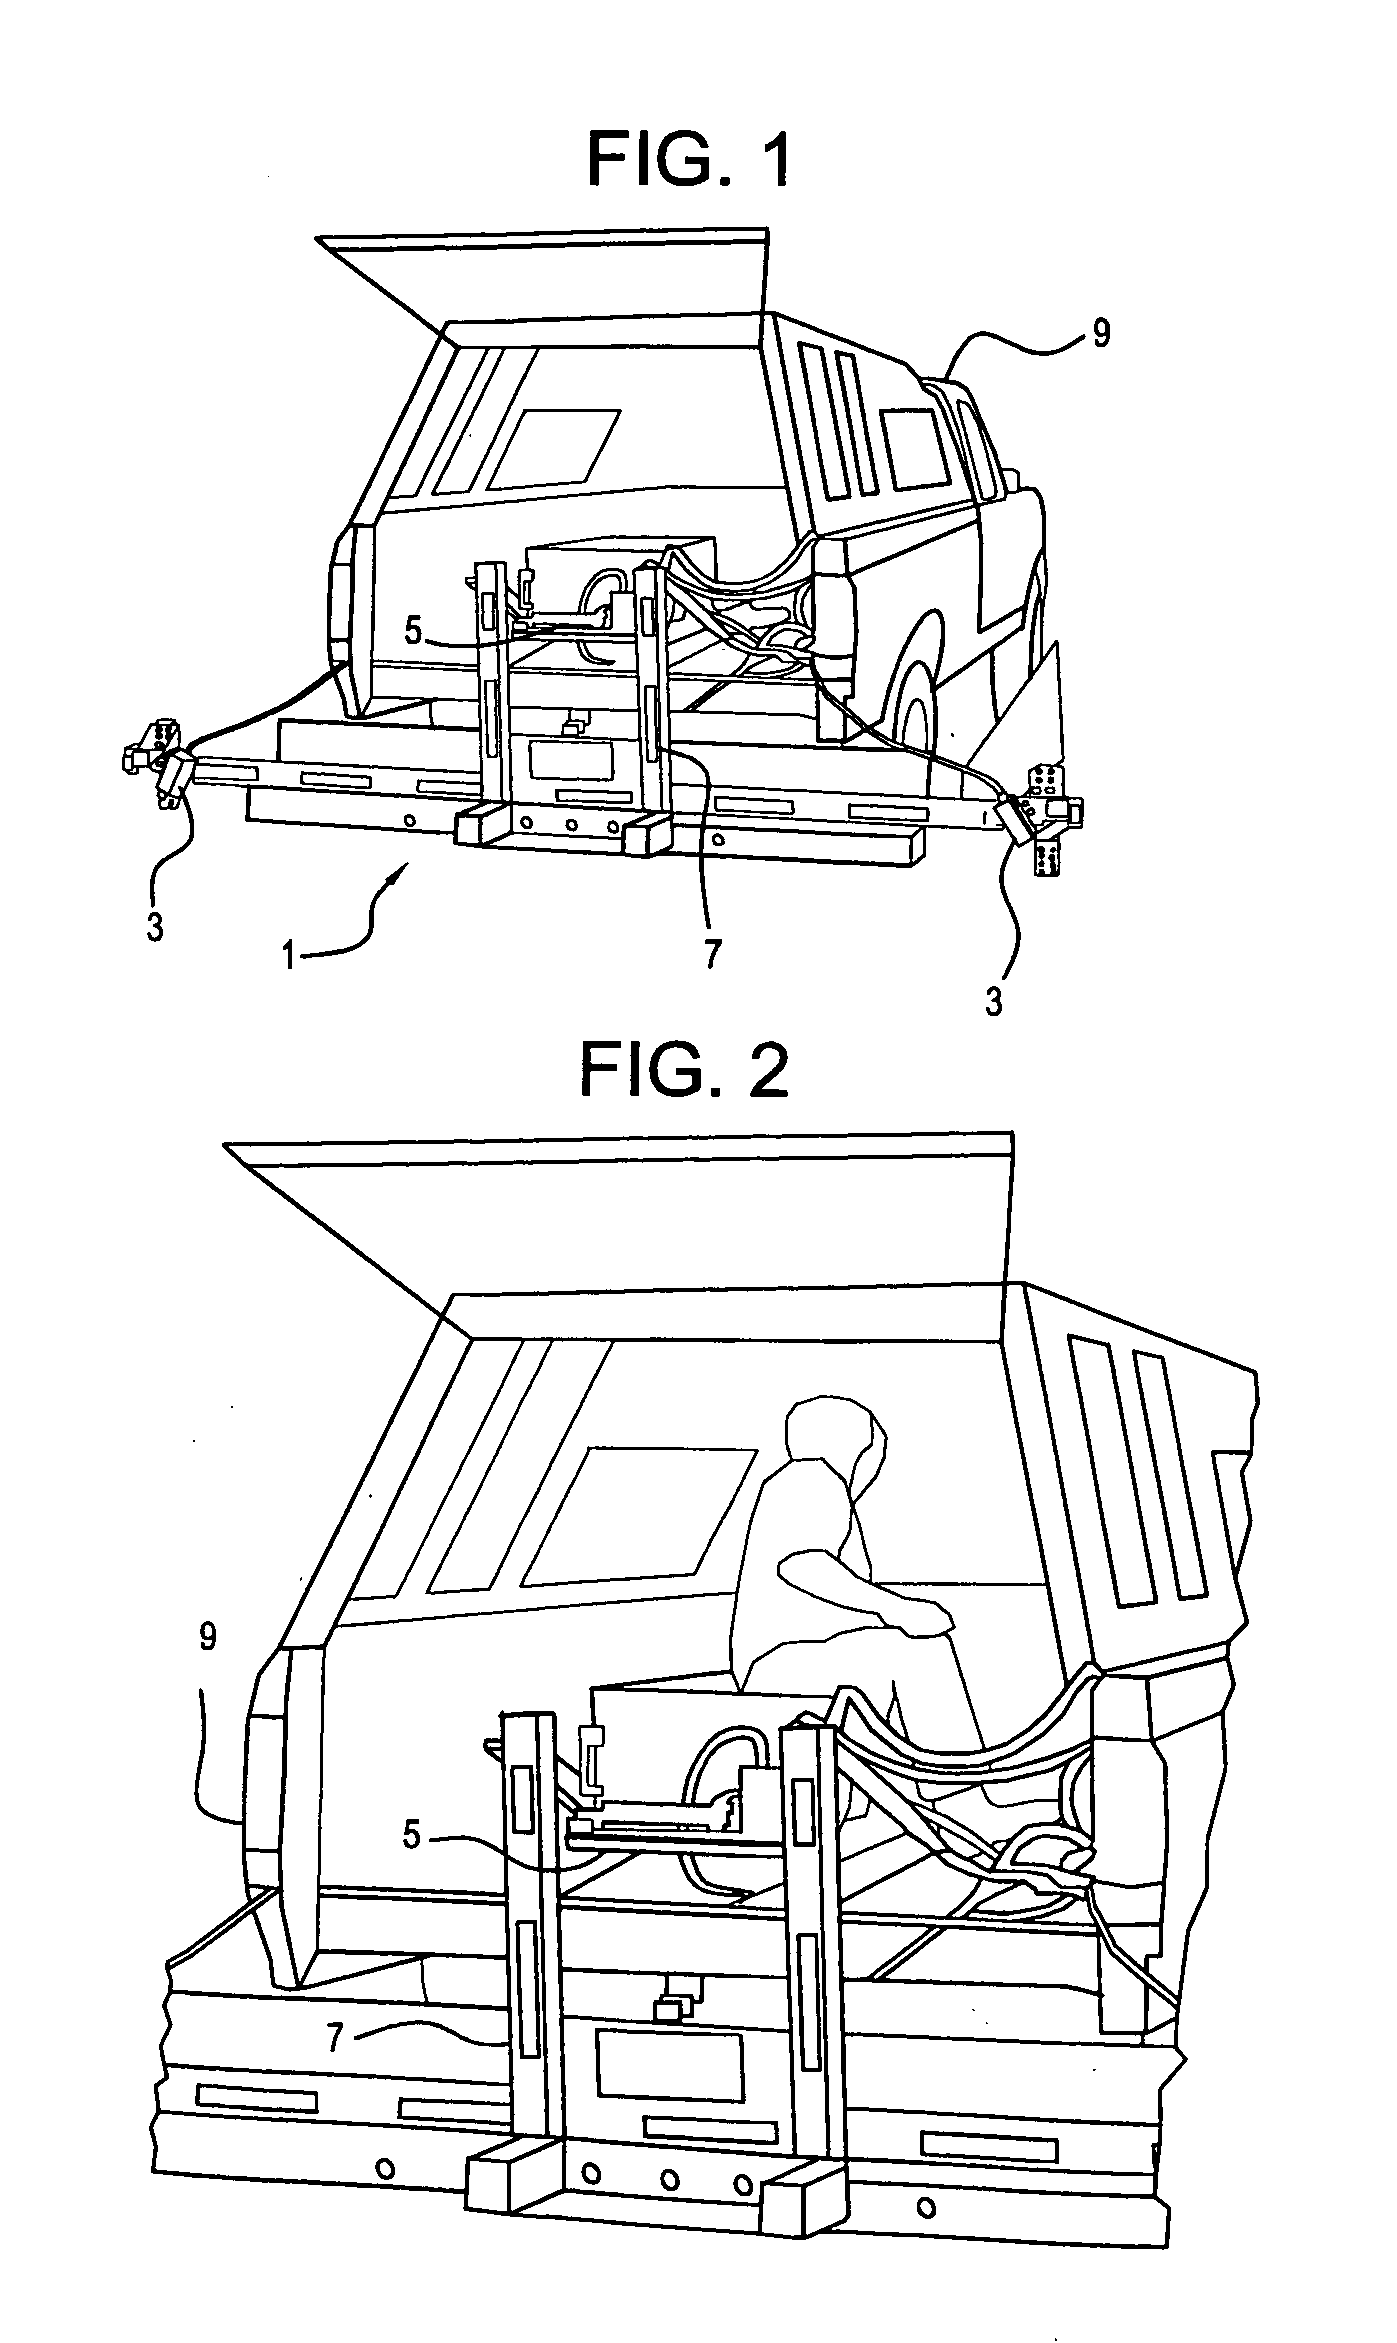 Method and apparatus for pavement cross-slope measurement